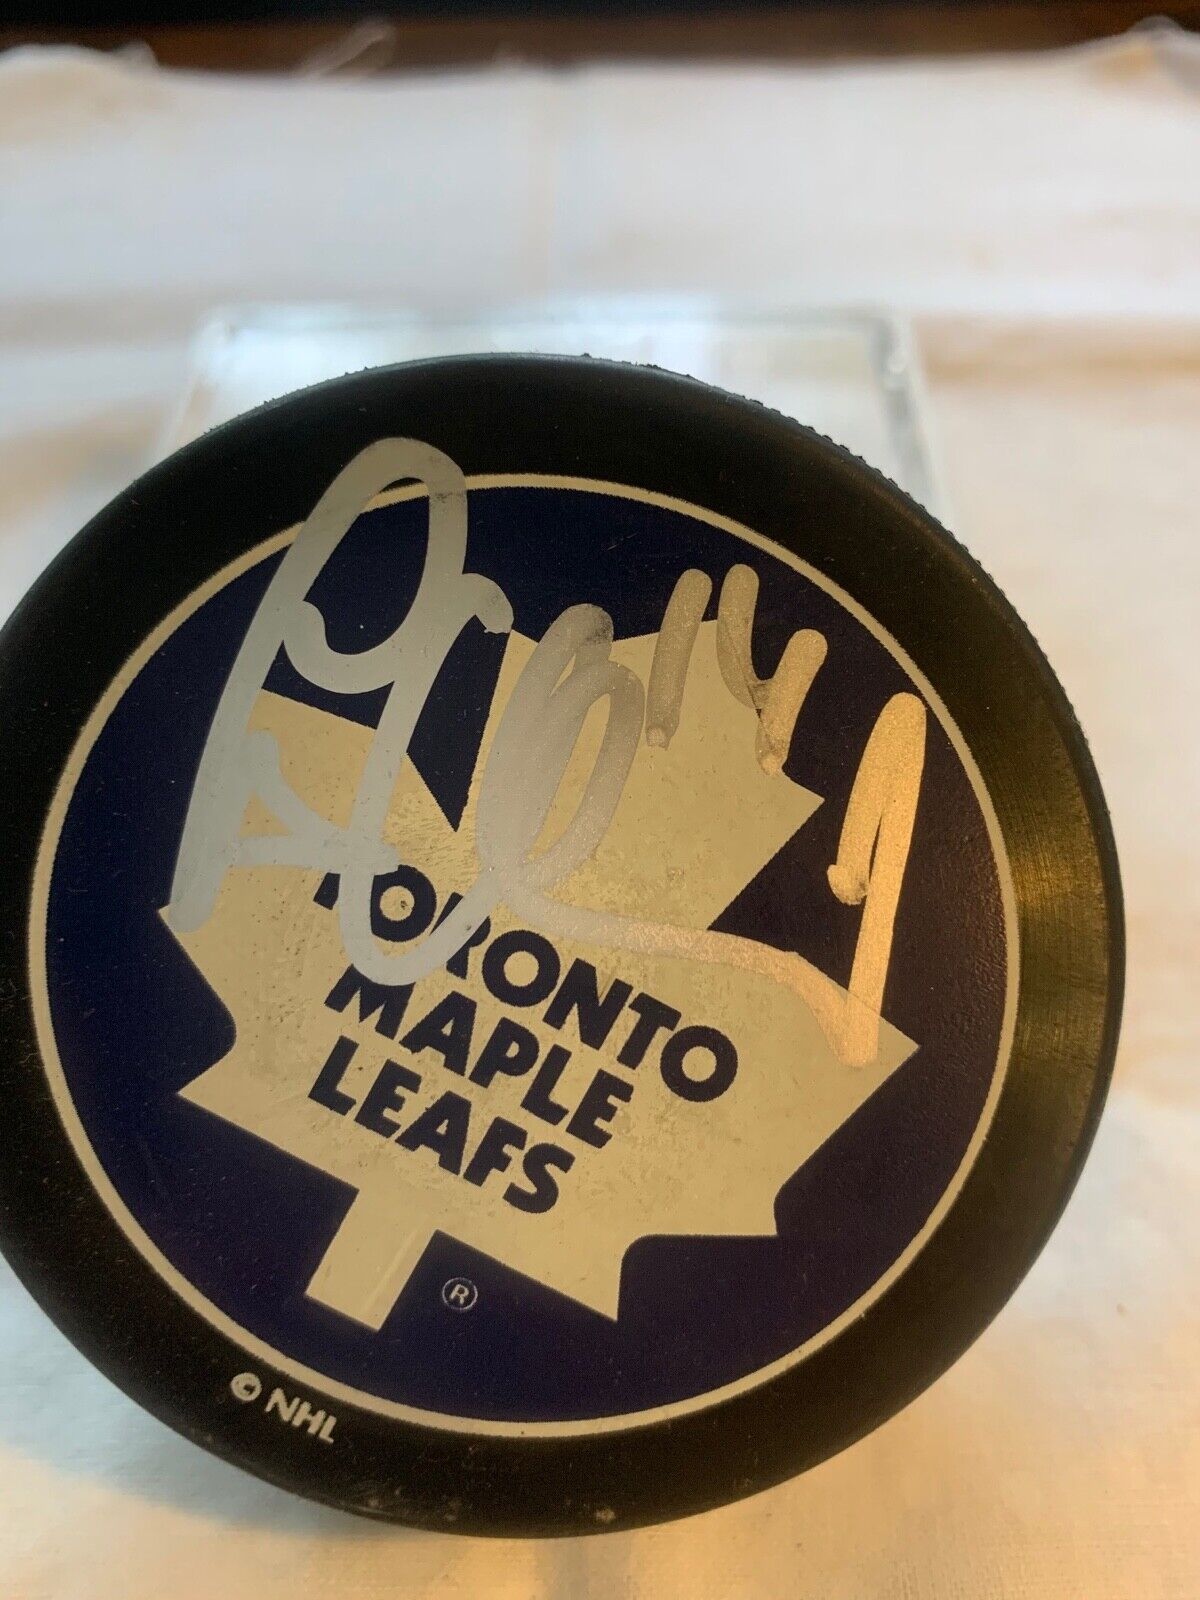 Toronto Maple Leafs Puck Autographed by Jonas Hoglund w/ All Sports COA